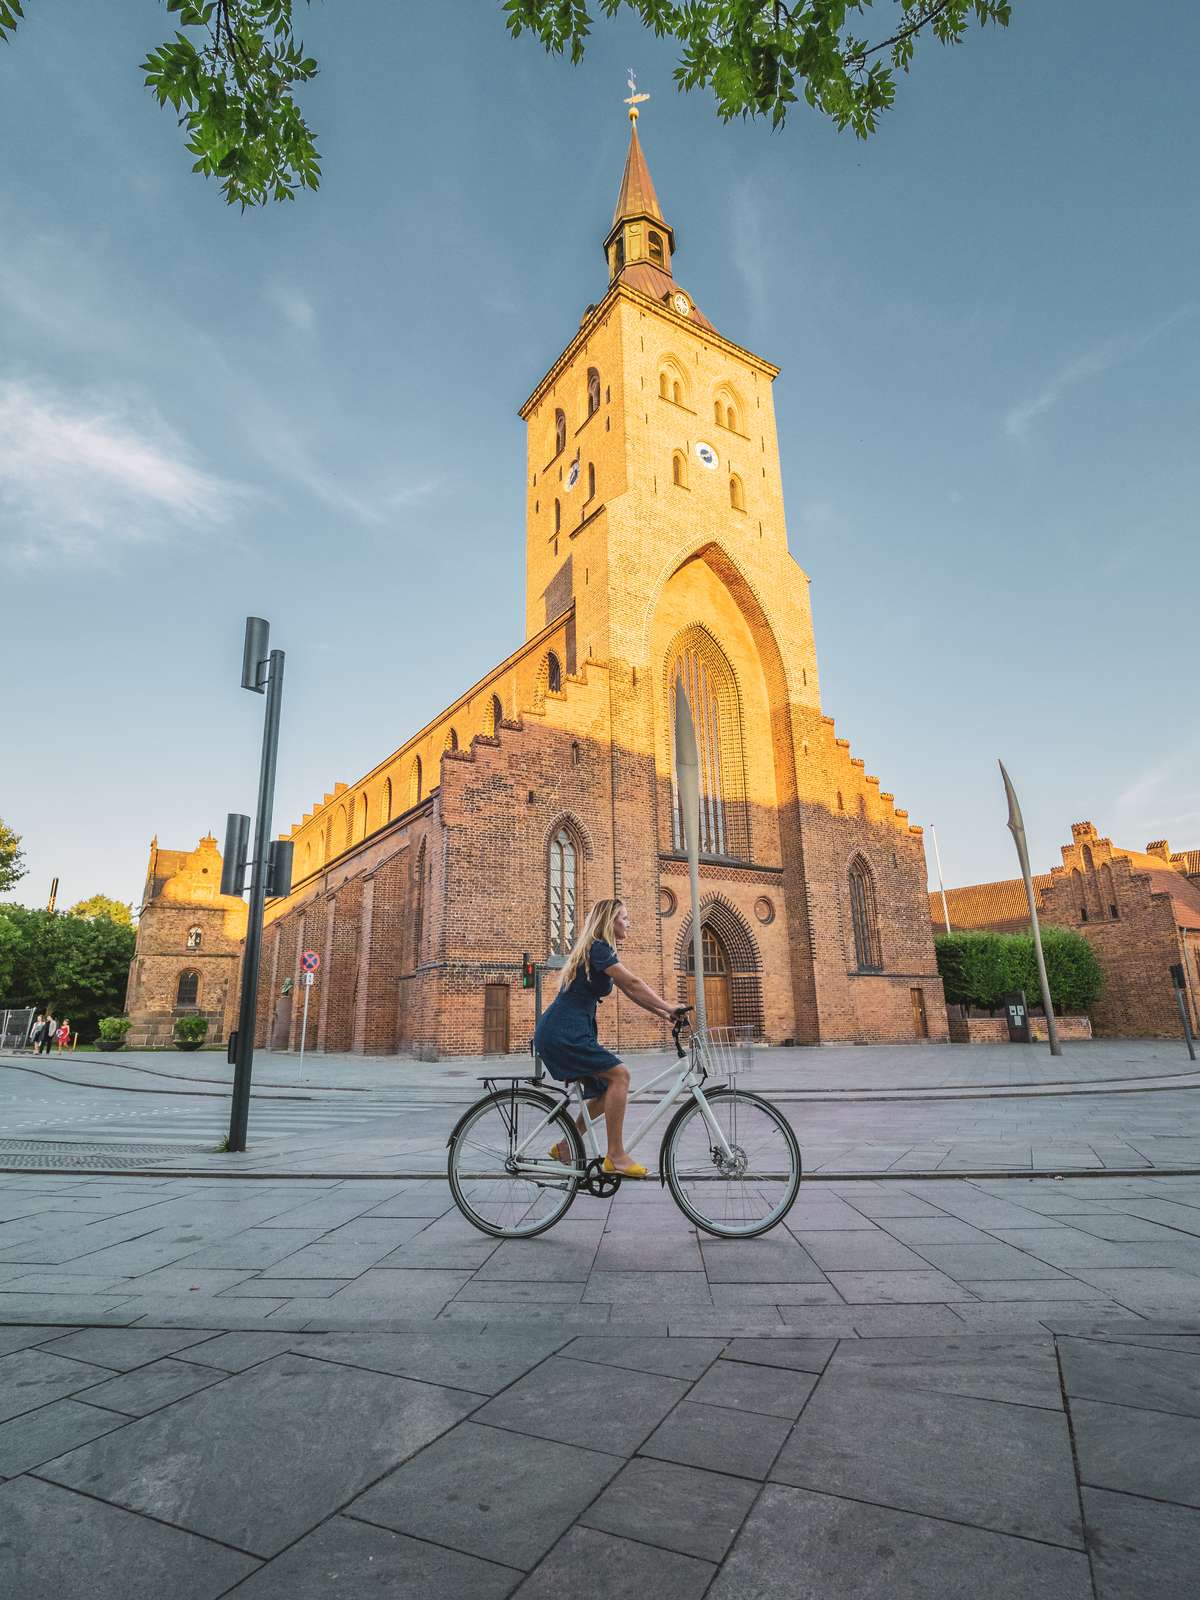 Cykling Odense sommer 2020 flakhaven